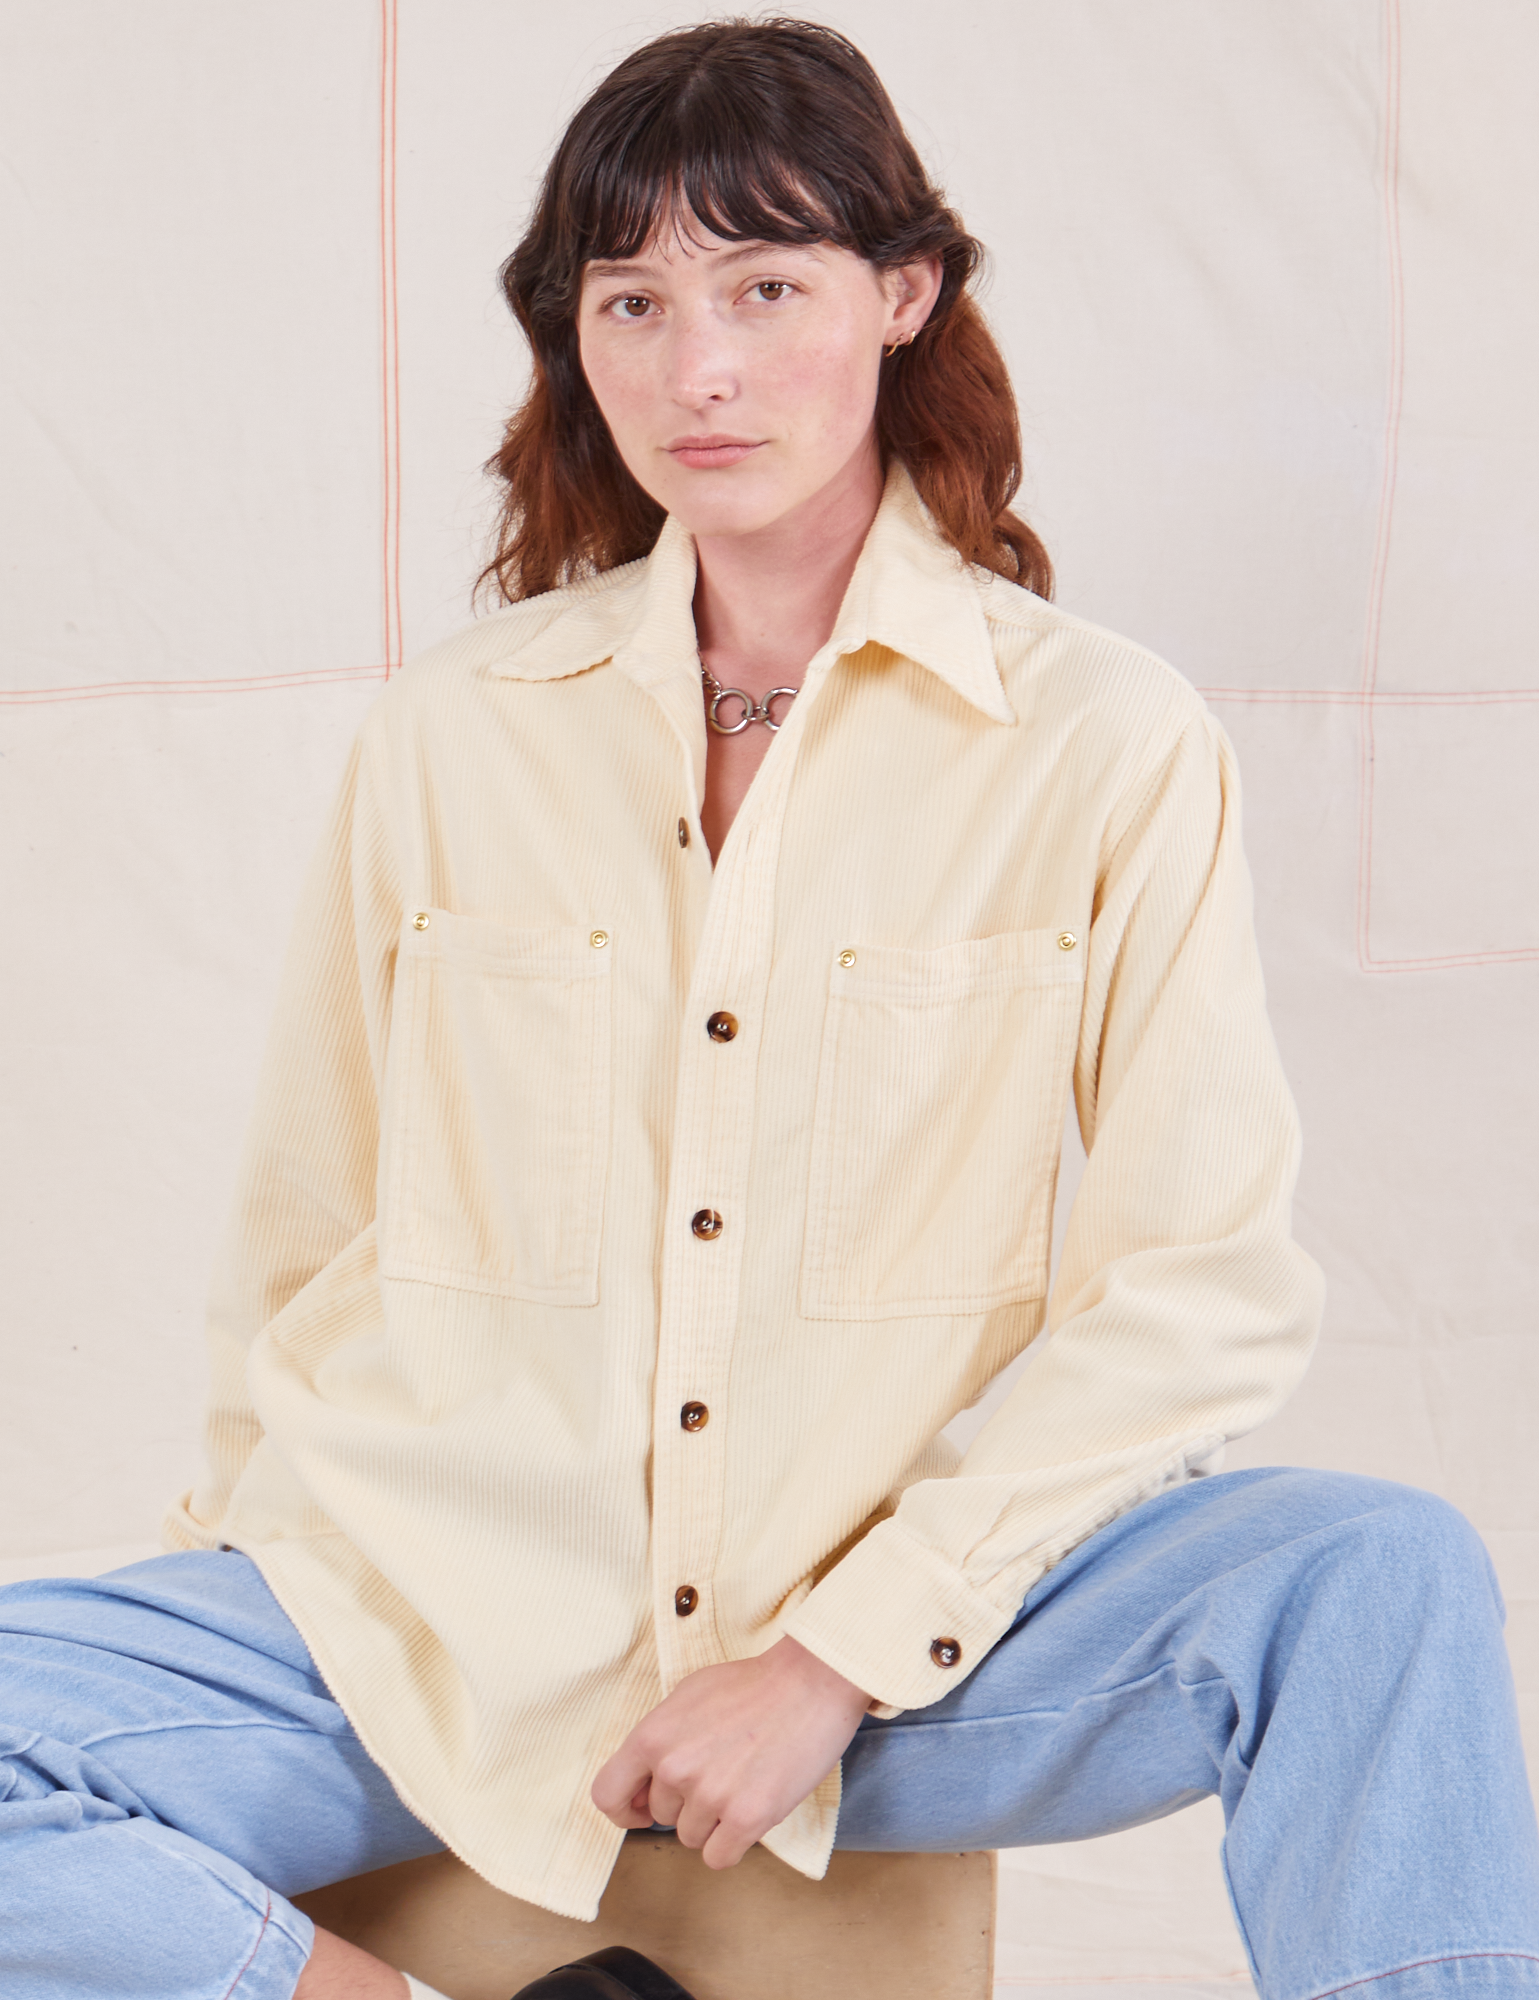 Alex is wearing Corduroy Overshirt in Vintage Off-White